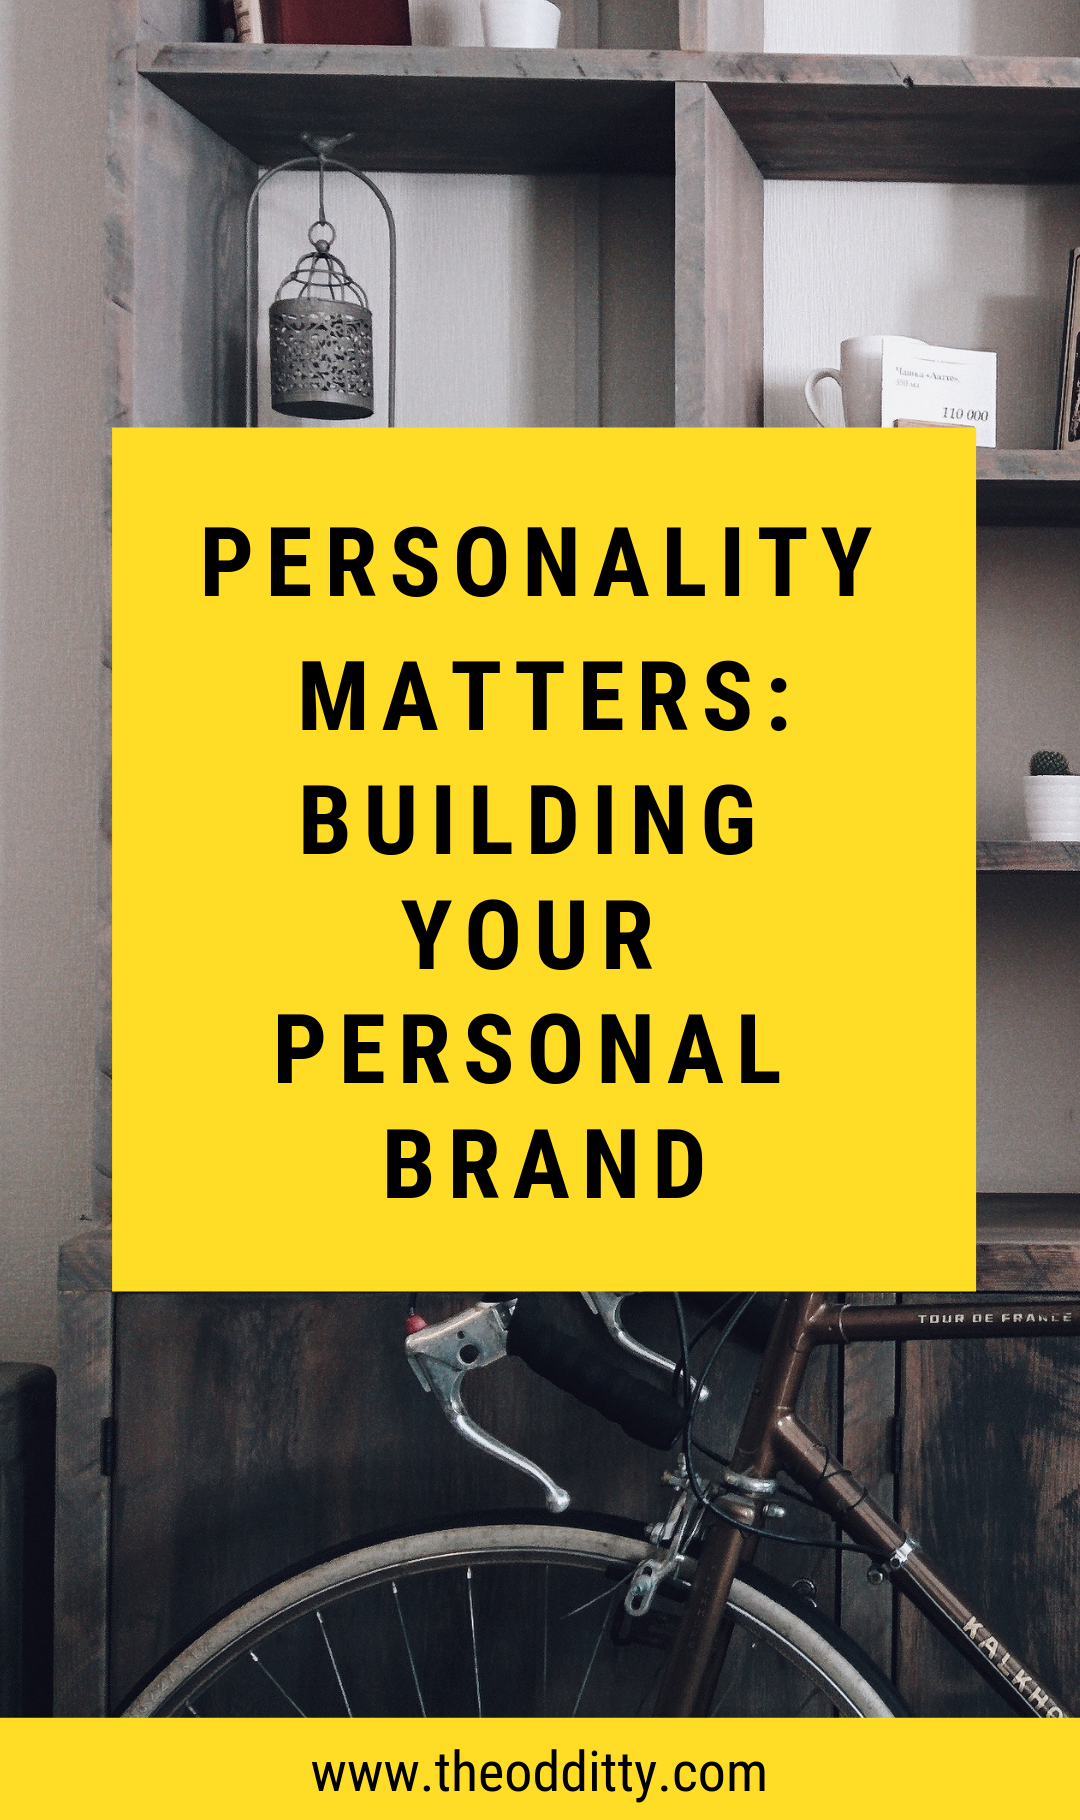 Building your personal brand